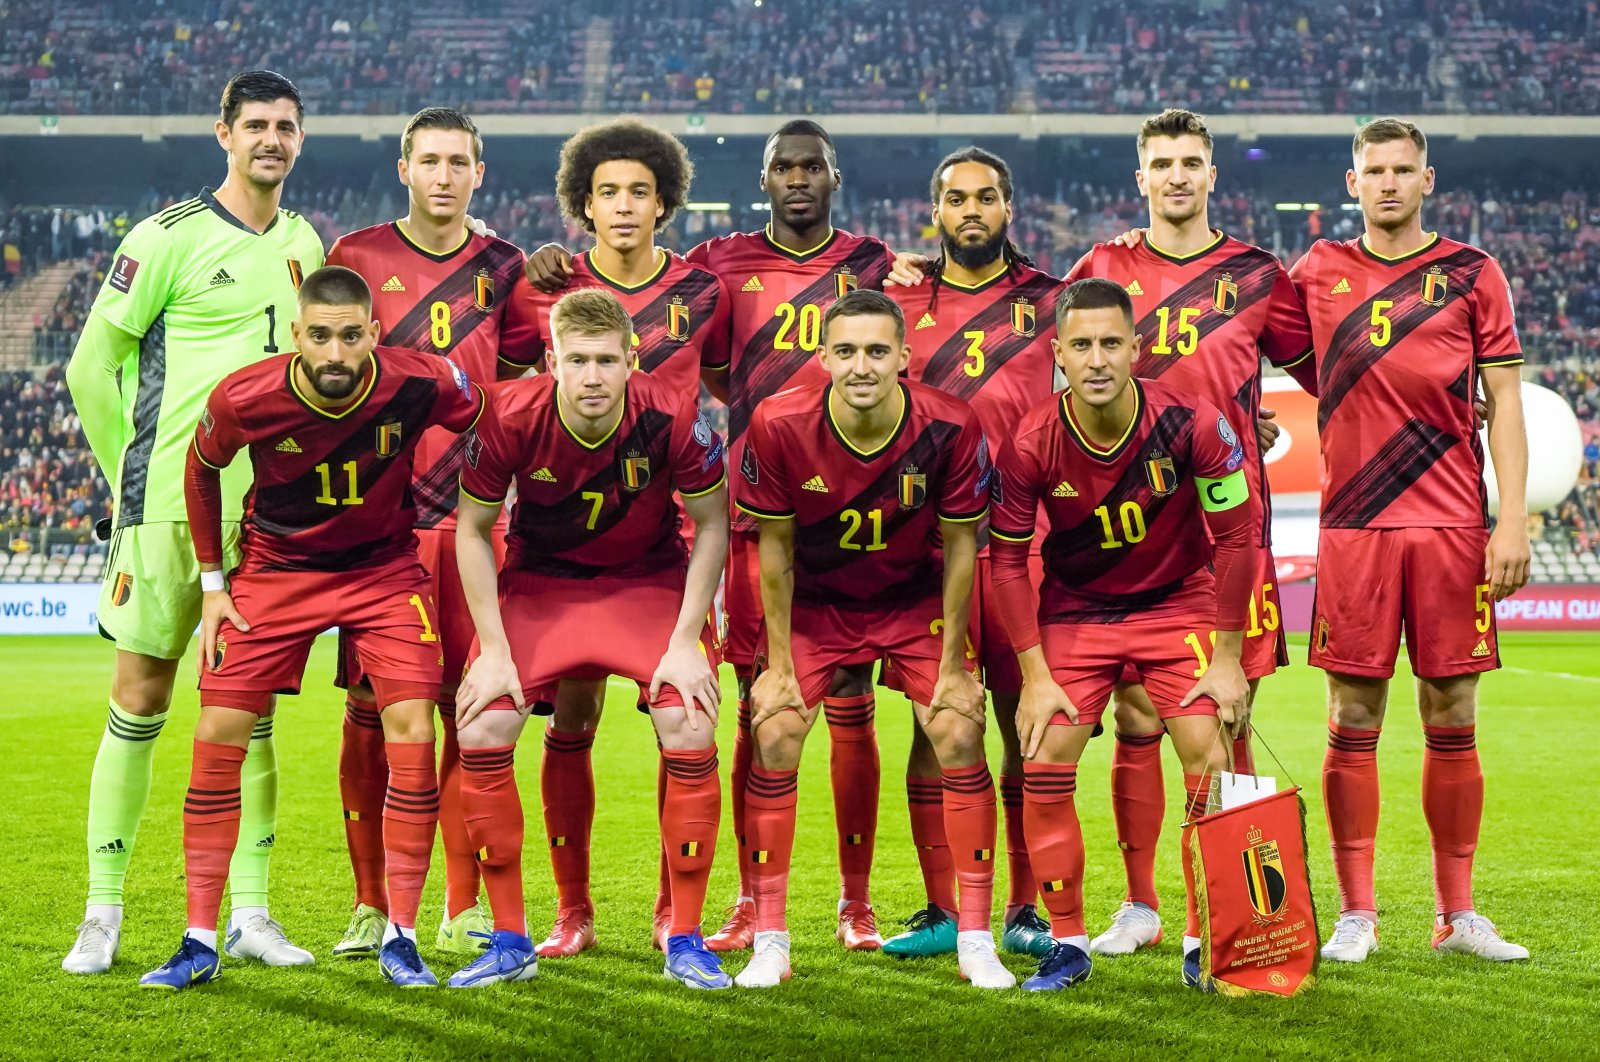 Players of Belgium pose for a team photo during the 2022 FIFA World Cup Qualifier match between Belgium and Estonia at the King Baudouin Stadium, Brussels, Belgium, Nov. 13, 2021. (Getty Images Photo)